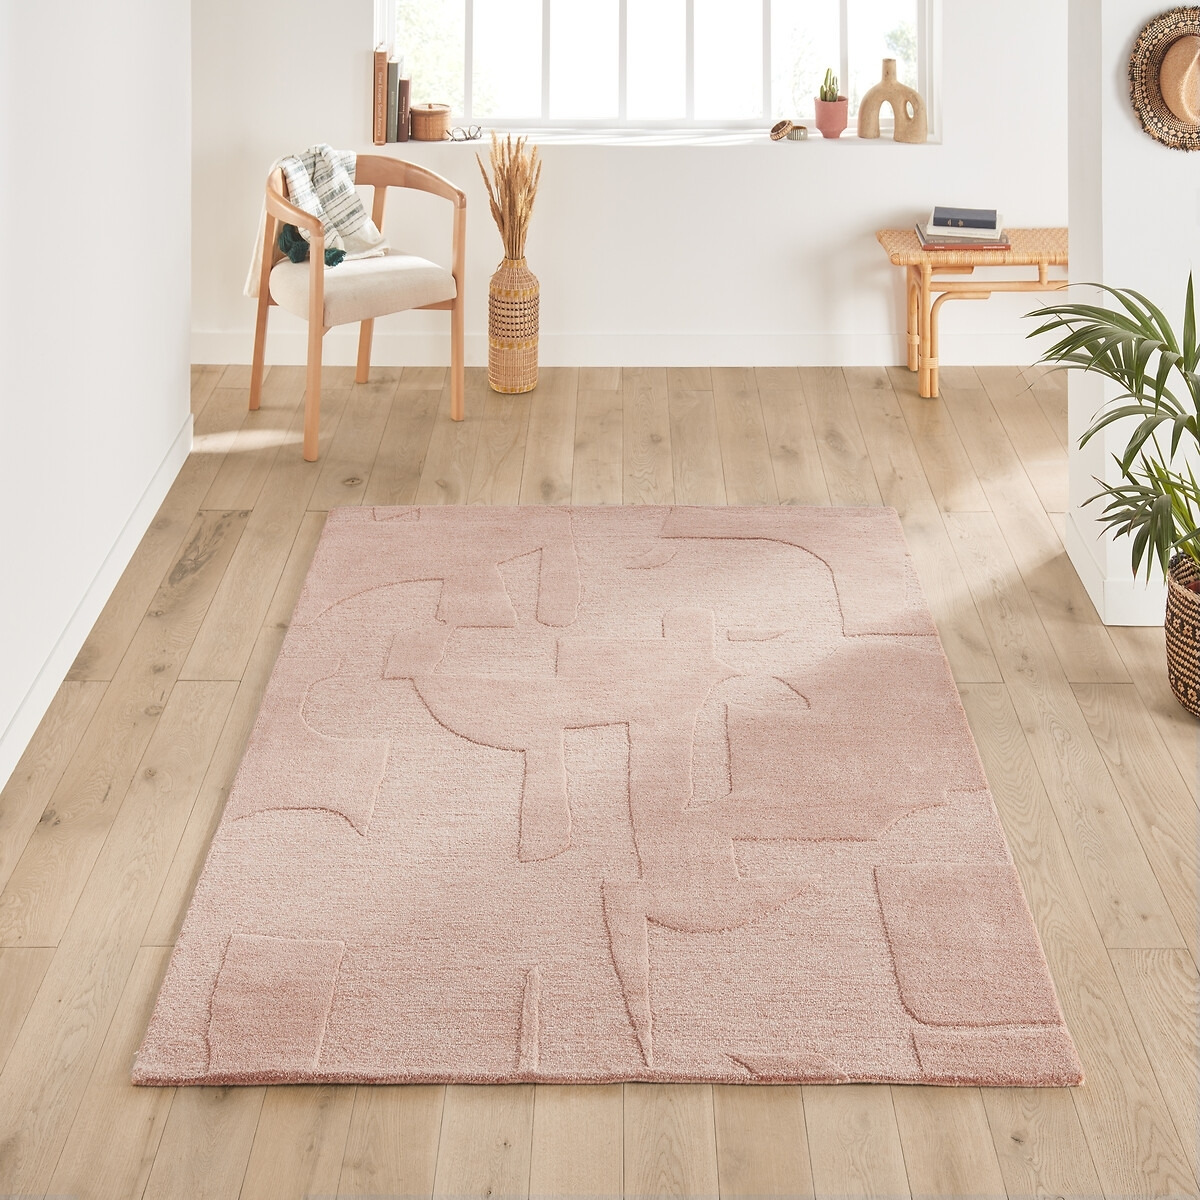 Capille Textured 100% Wool Rug - image 1